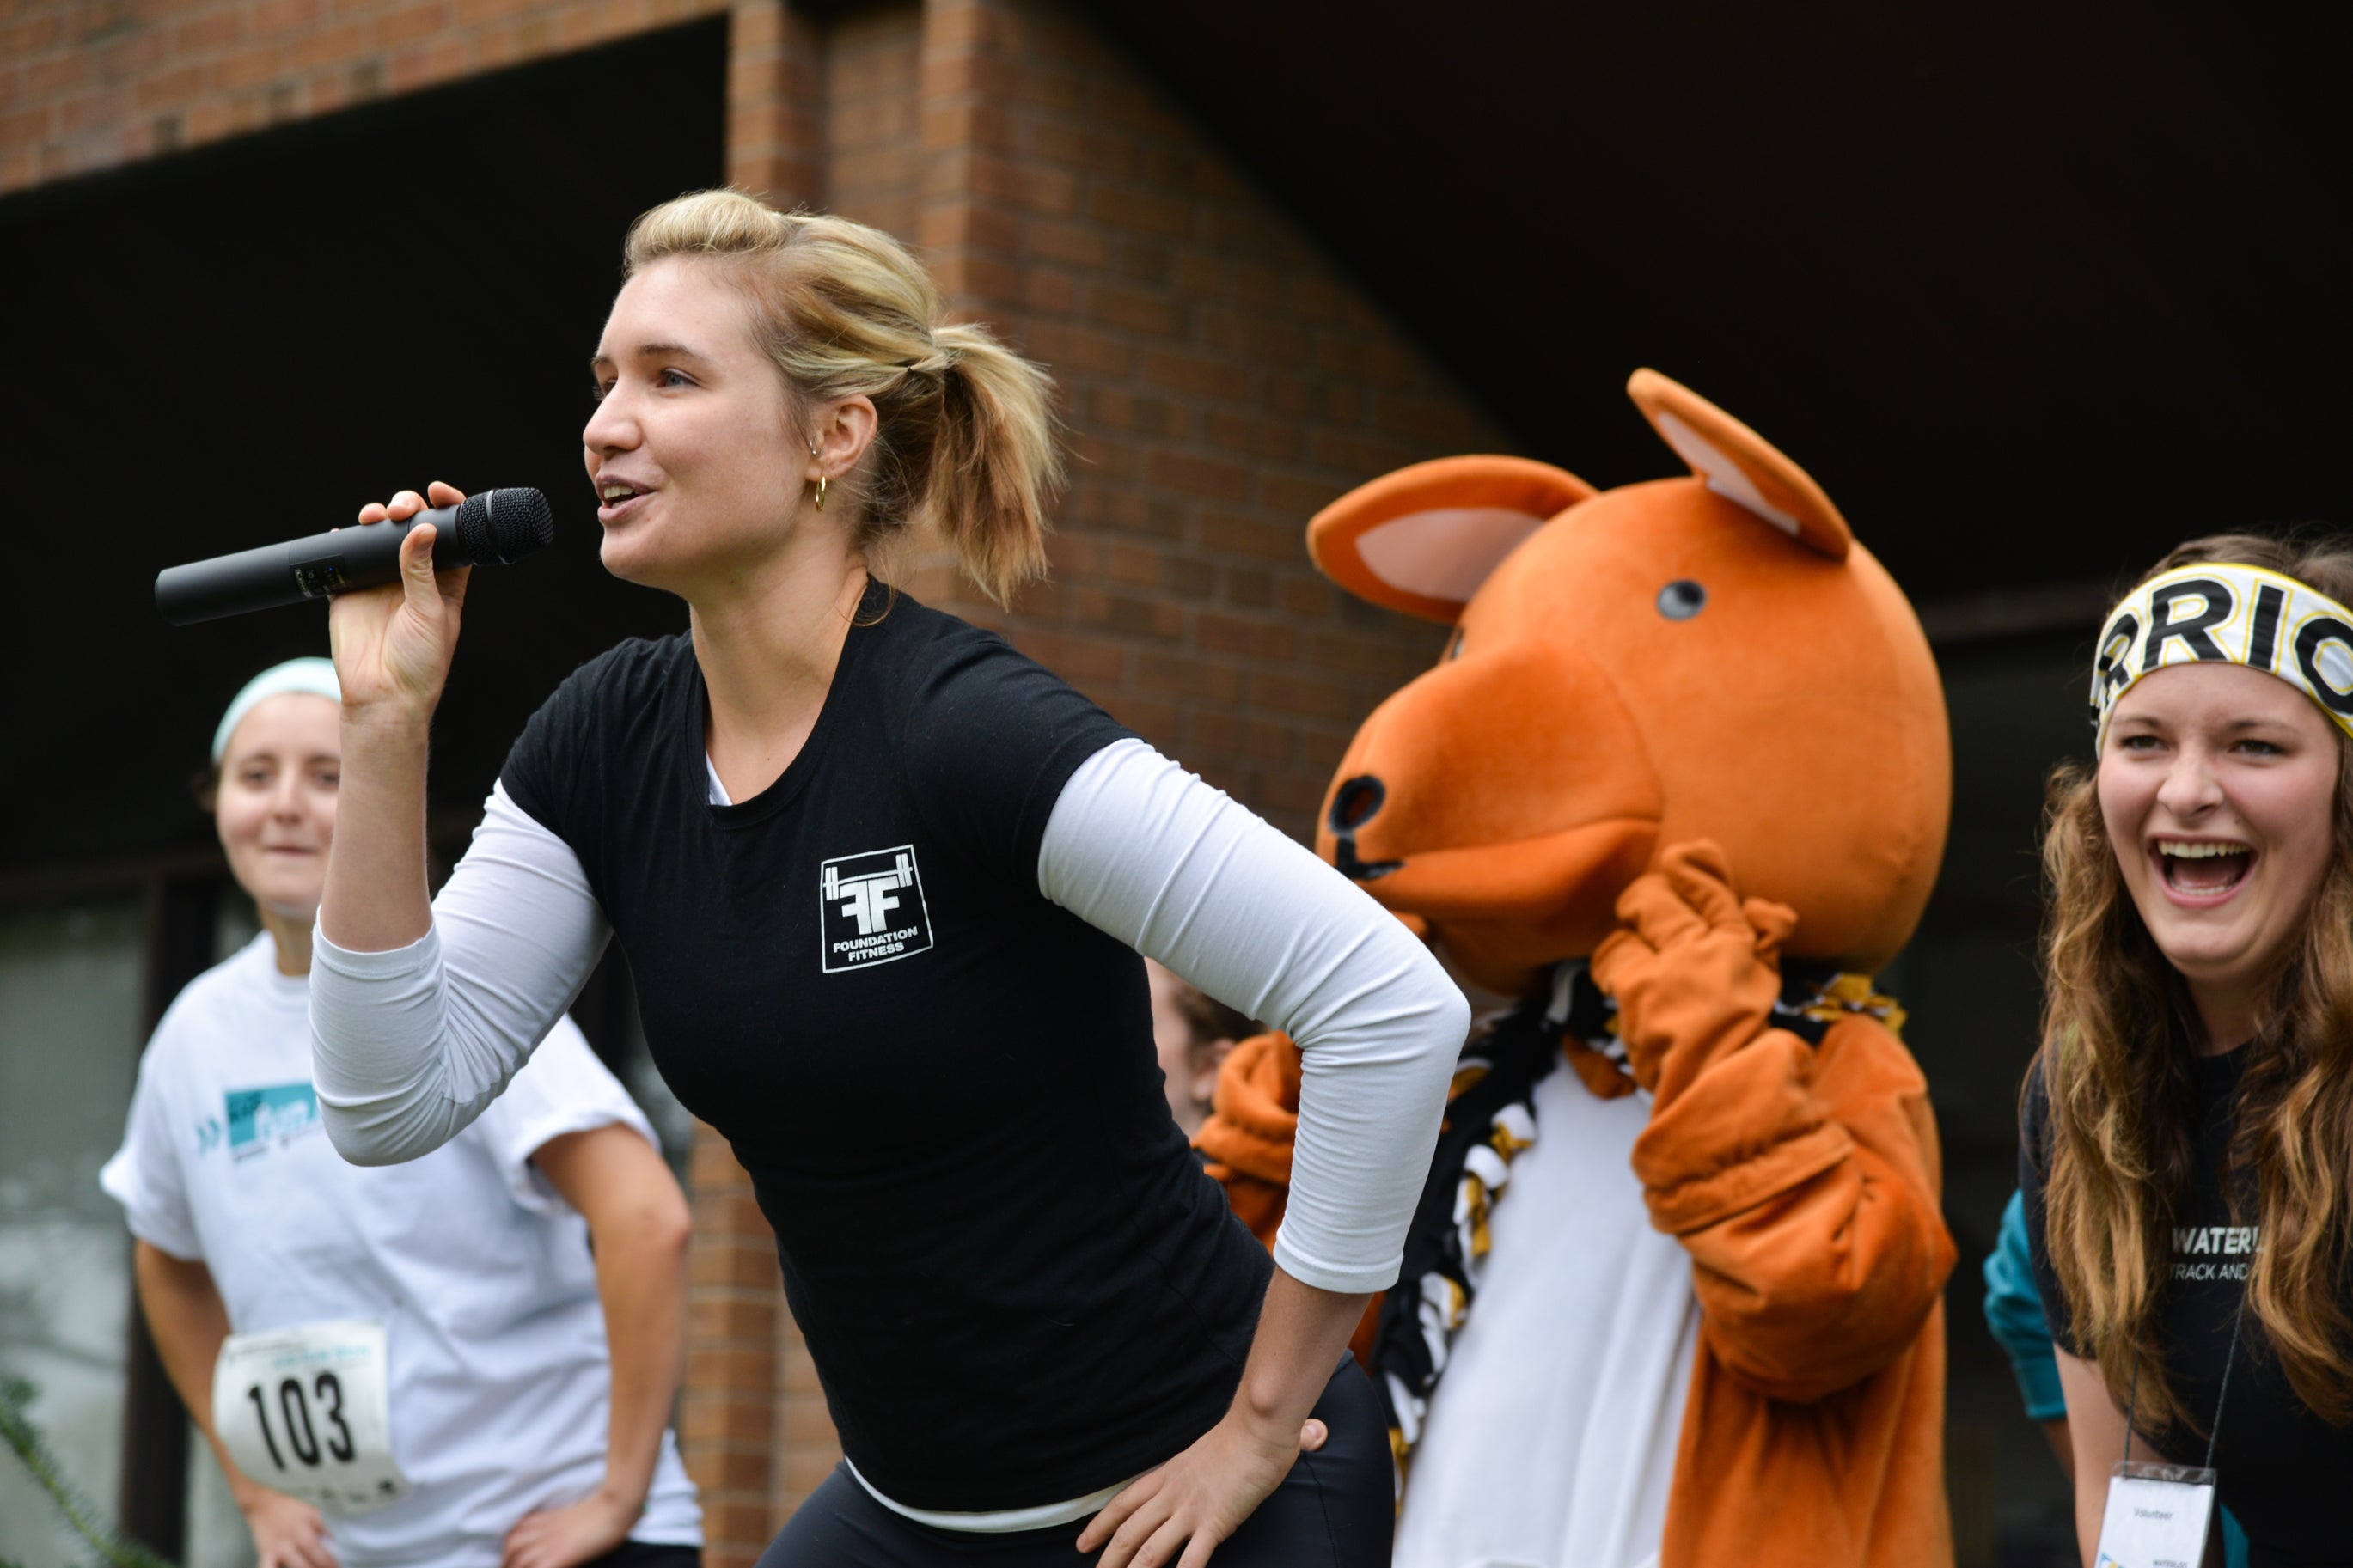 Woman singing into a microphone with kangaroo mascot in the background.